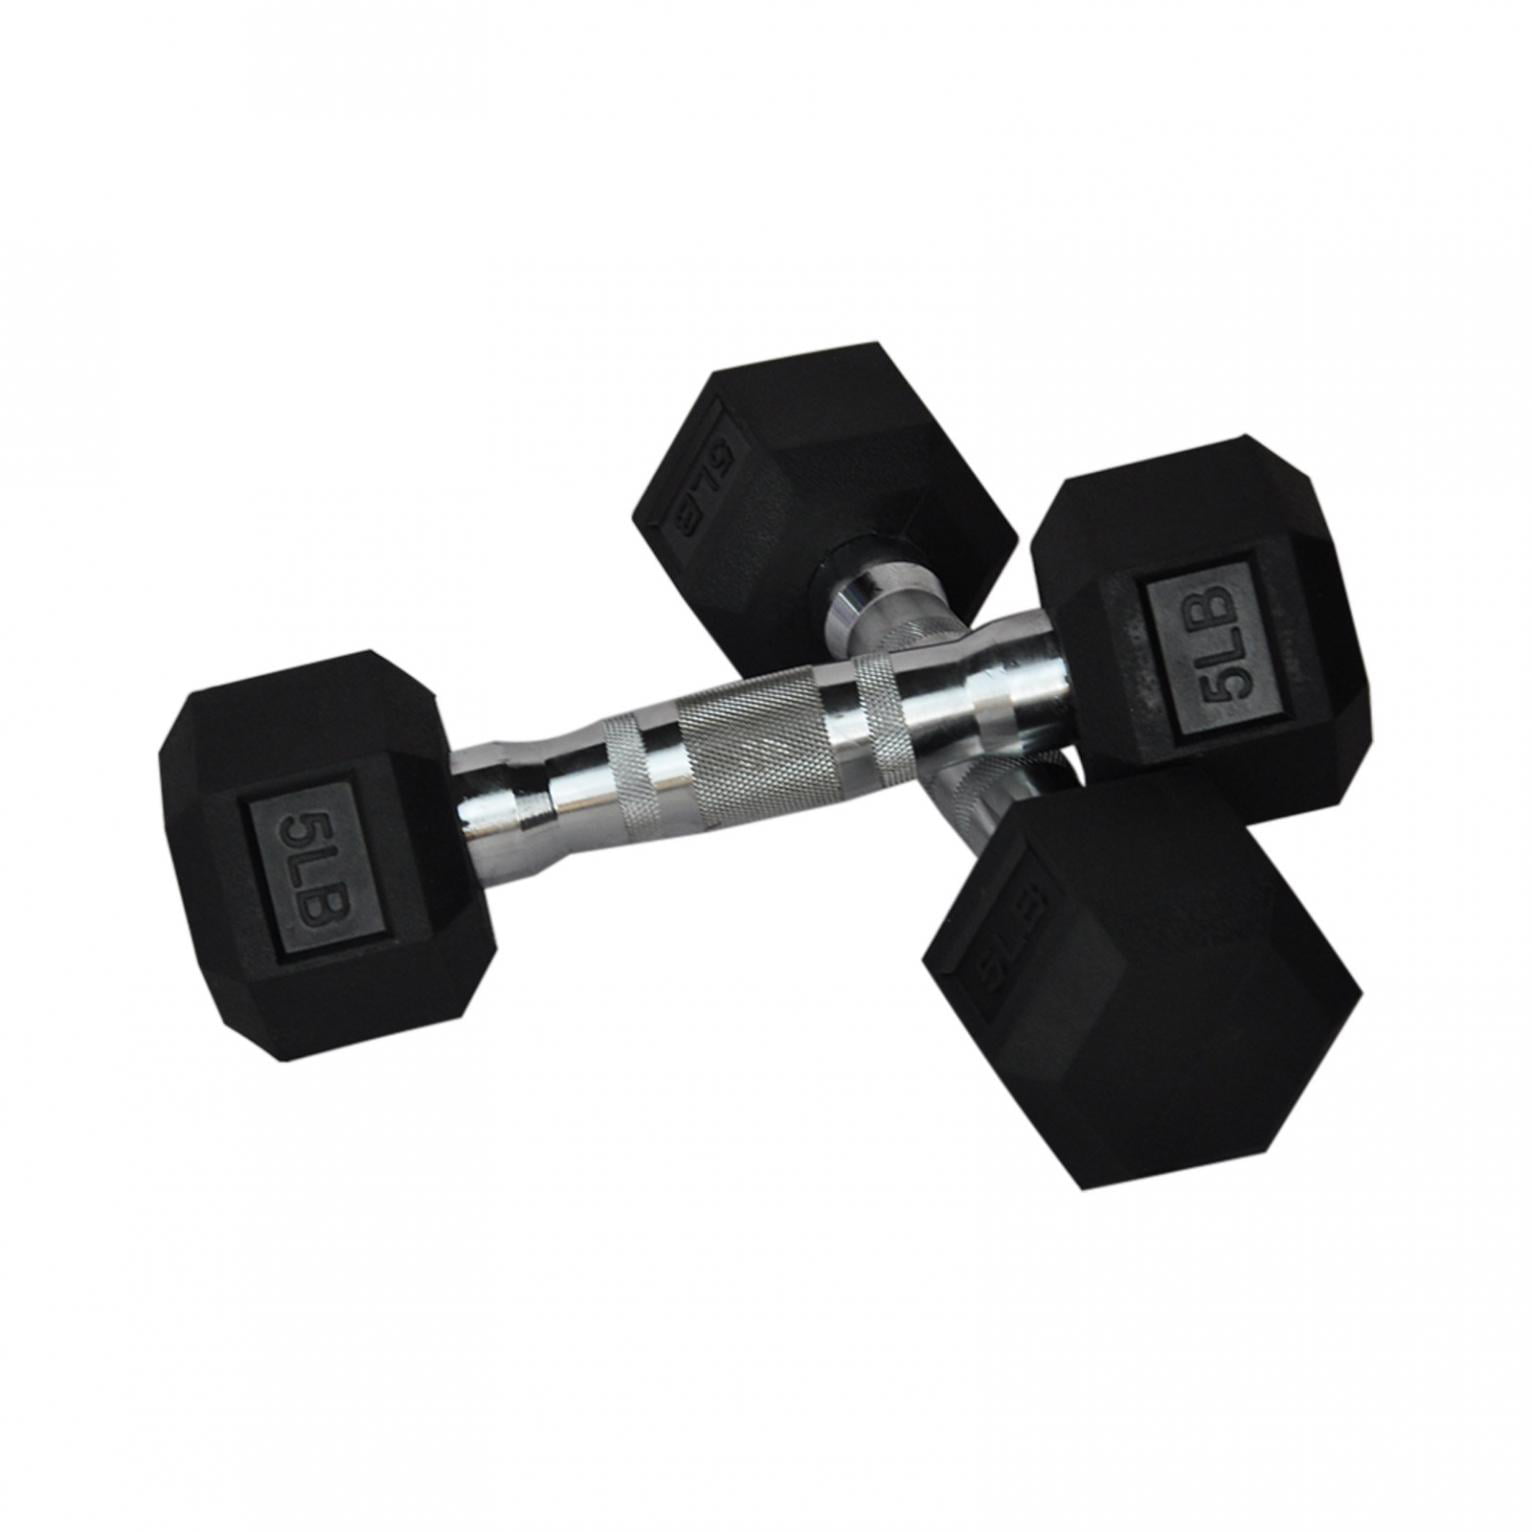 5lb, 10lb, 20 Lb, 30lb, 50lb Barbell Set of 2 Hex Rubber Dumbbell with Metal Handles Pair of 2 Heavy Dumbbells Choose Weight Cap Gym/Home Barbell Plates Body Workout